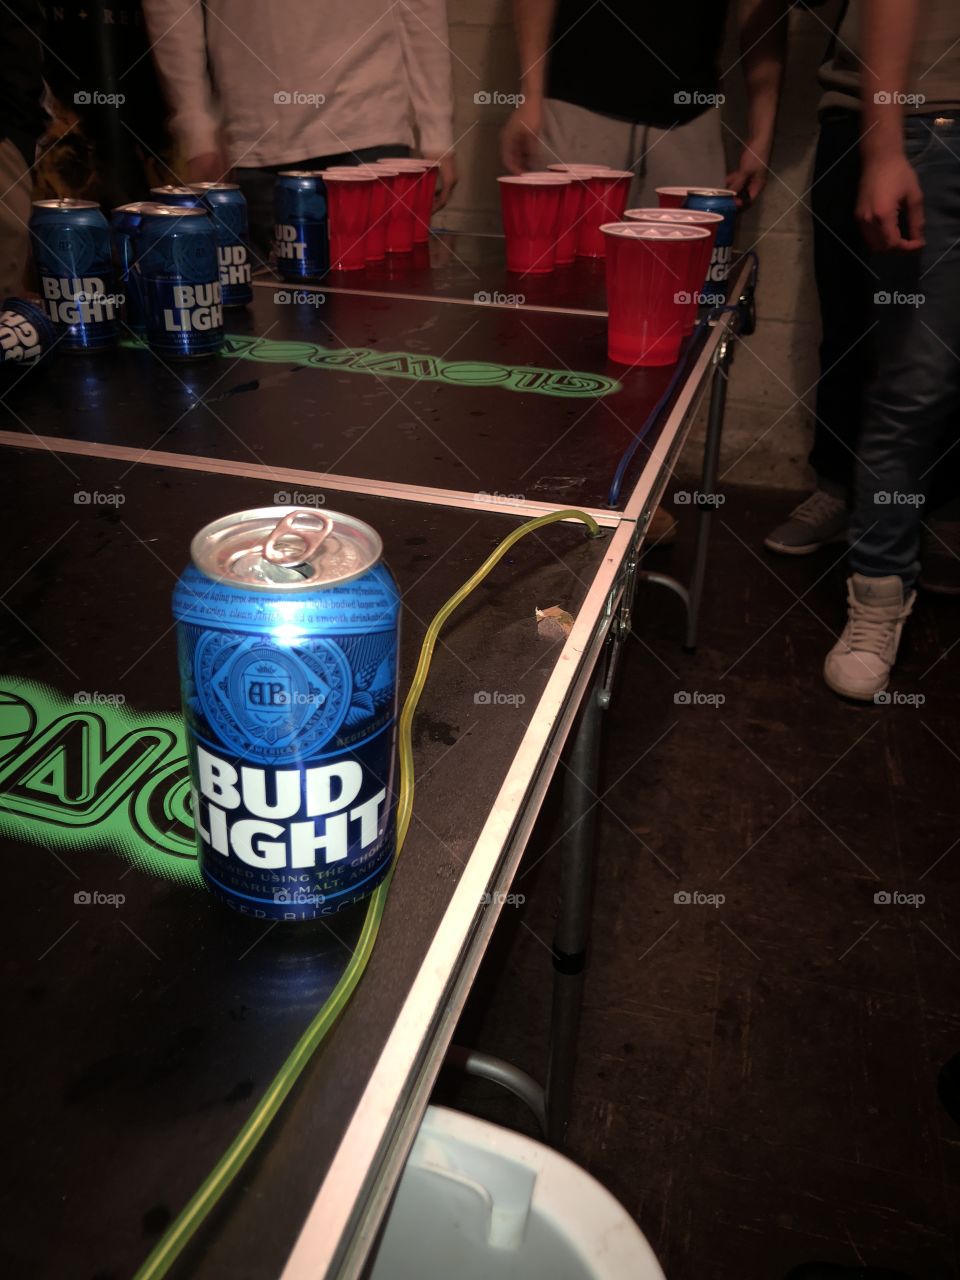 Budlight is a requirement for Beer pong 